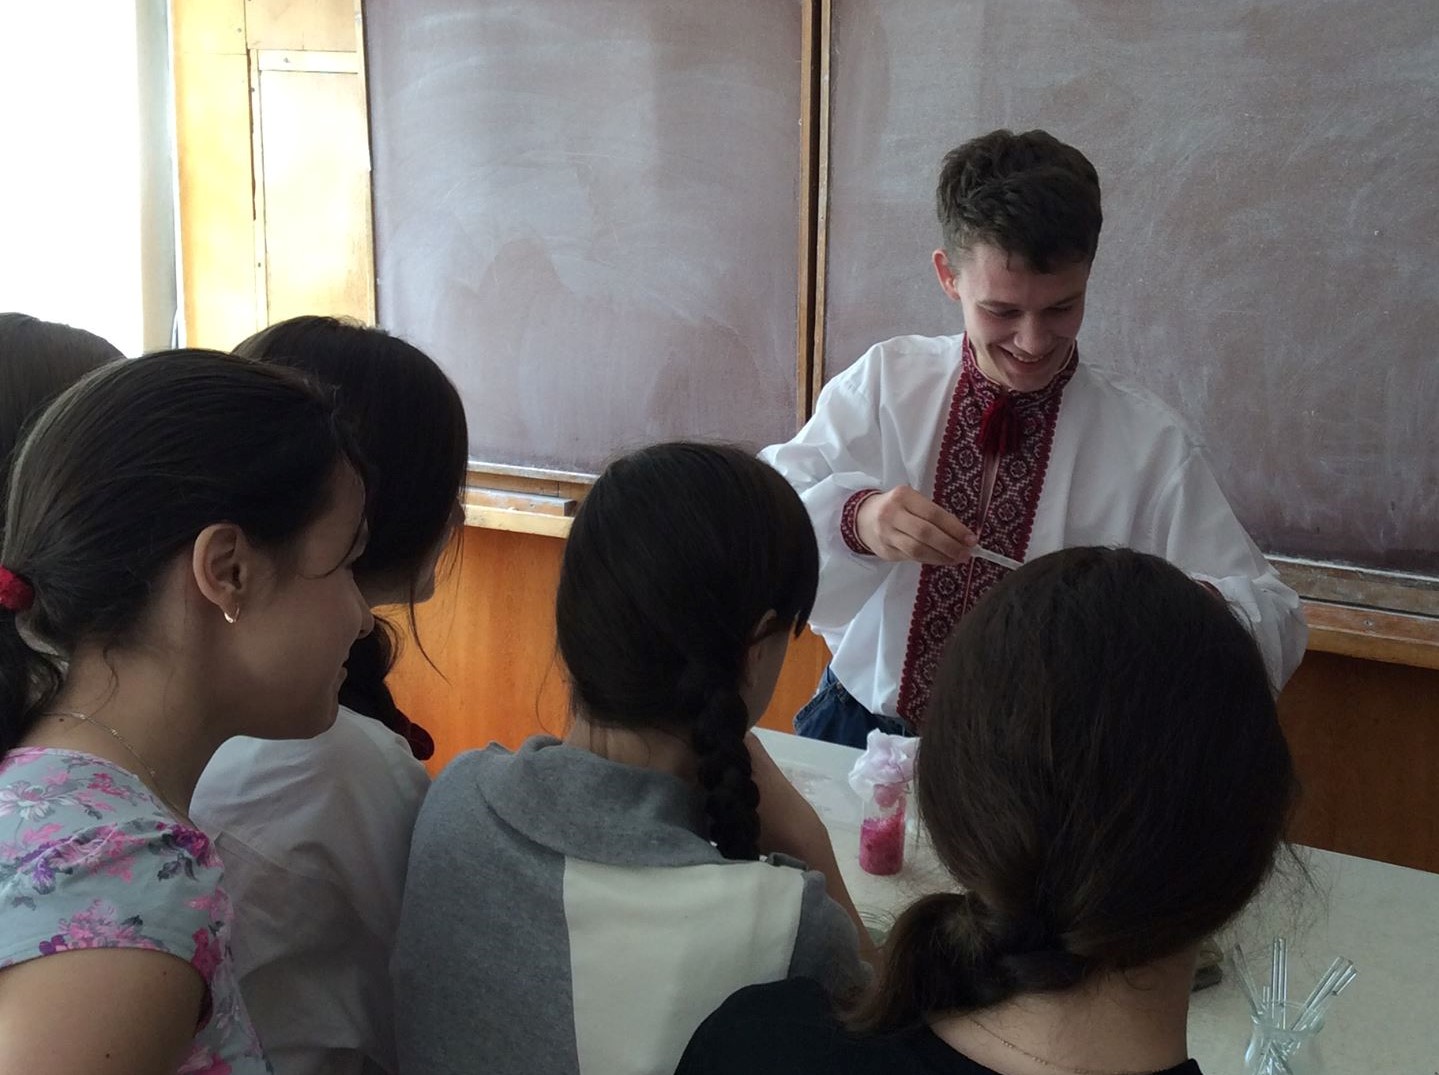 Roman is demonstrating the concert of pH indicators using the cabbage extract to a group of middle school students in Lutsk